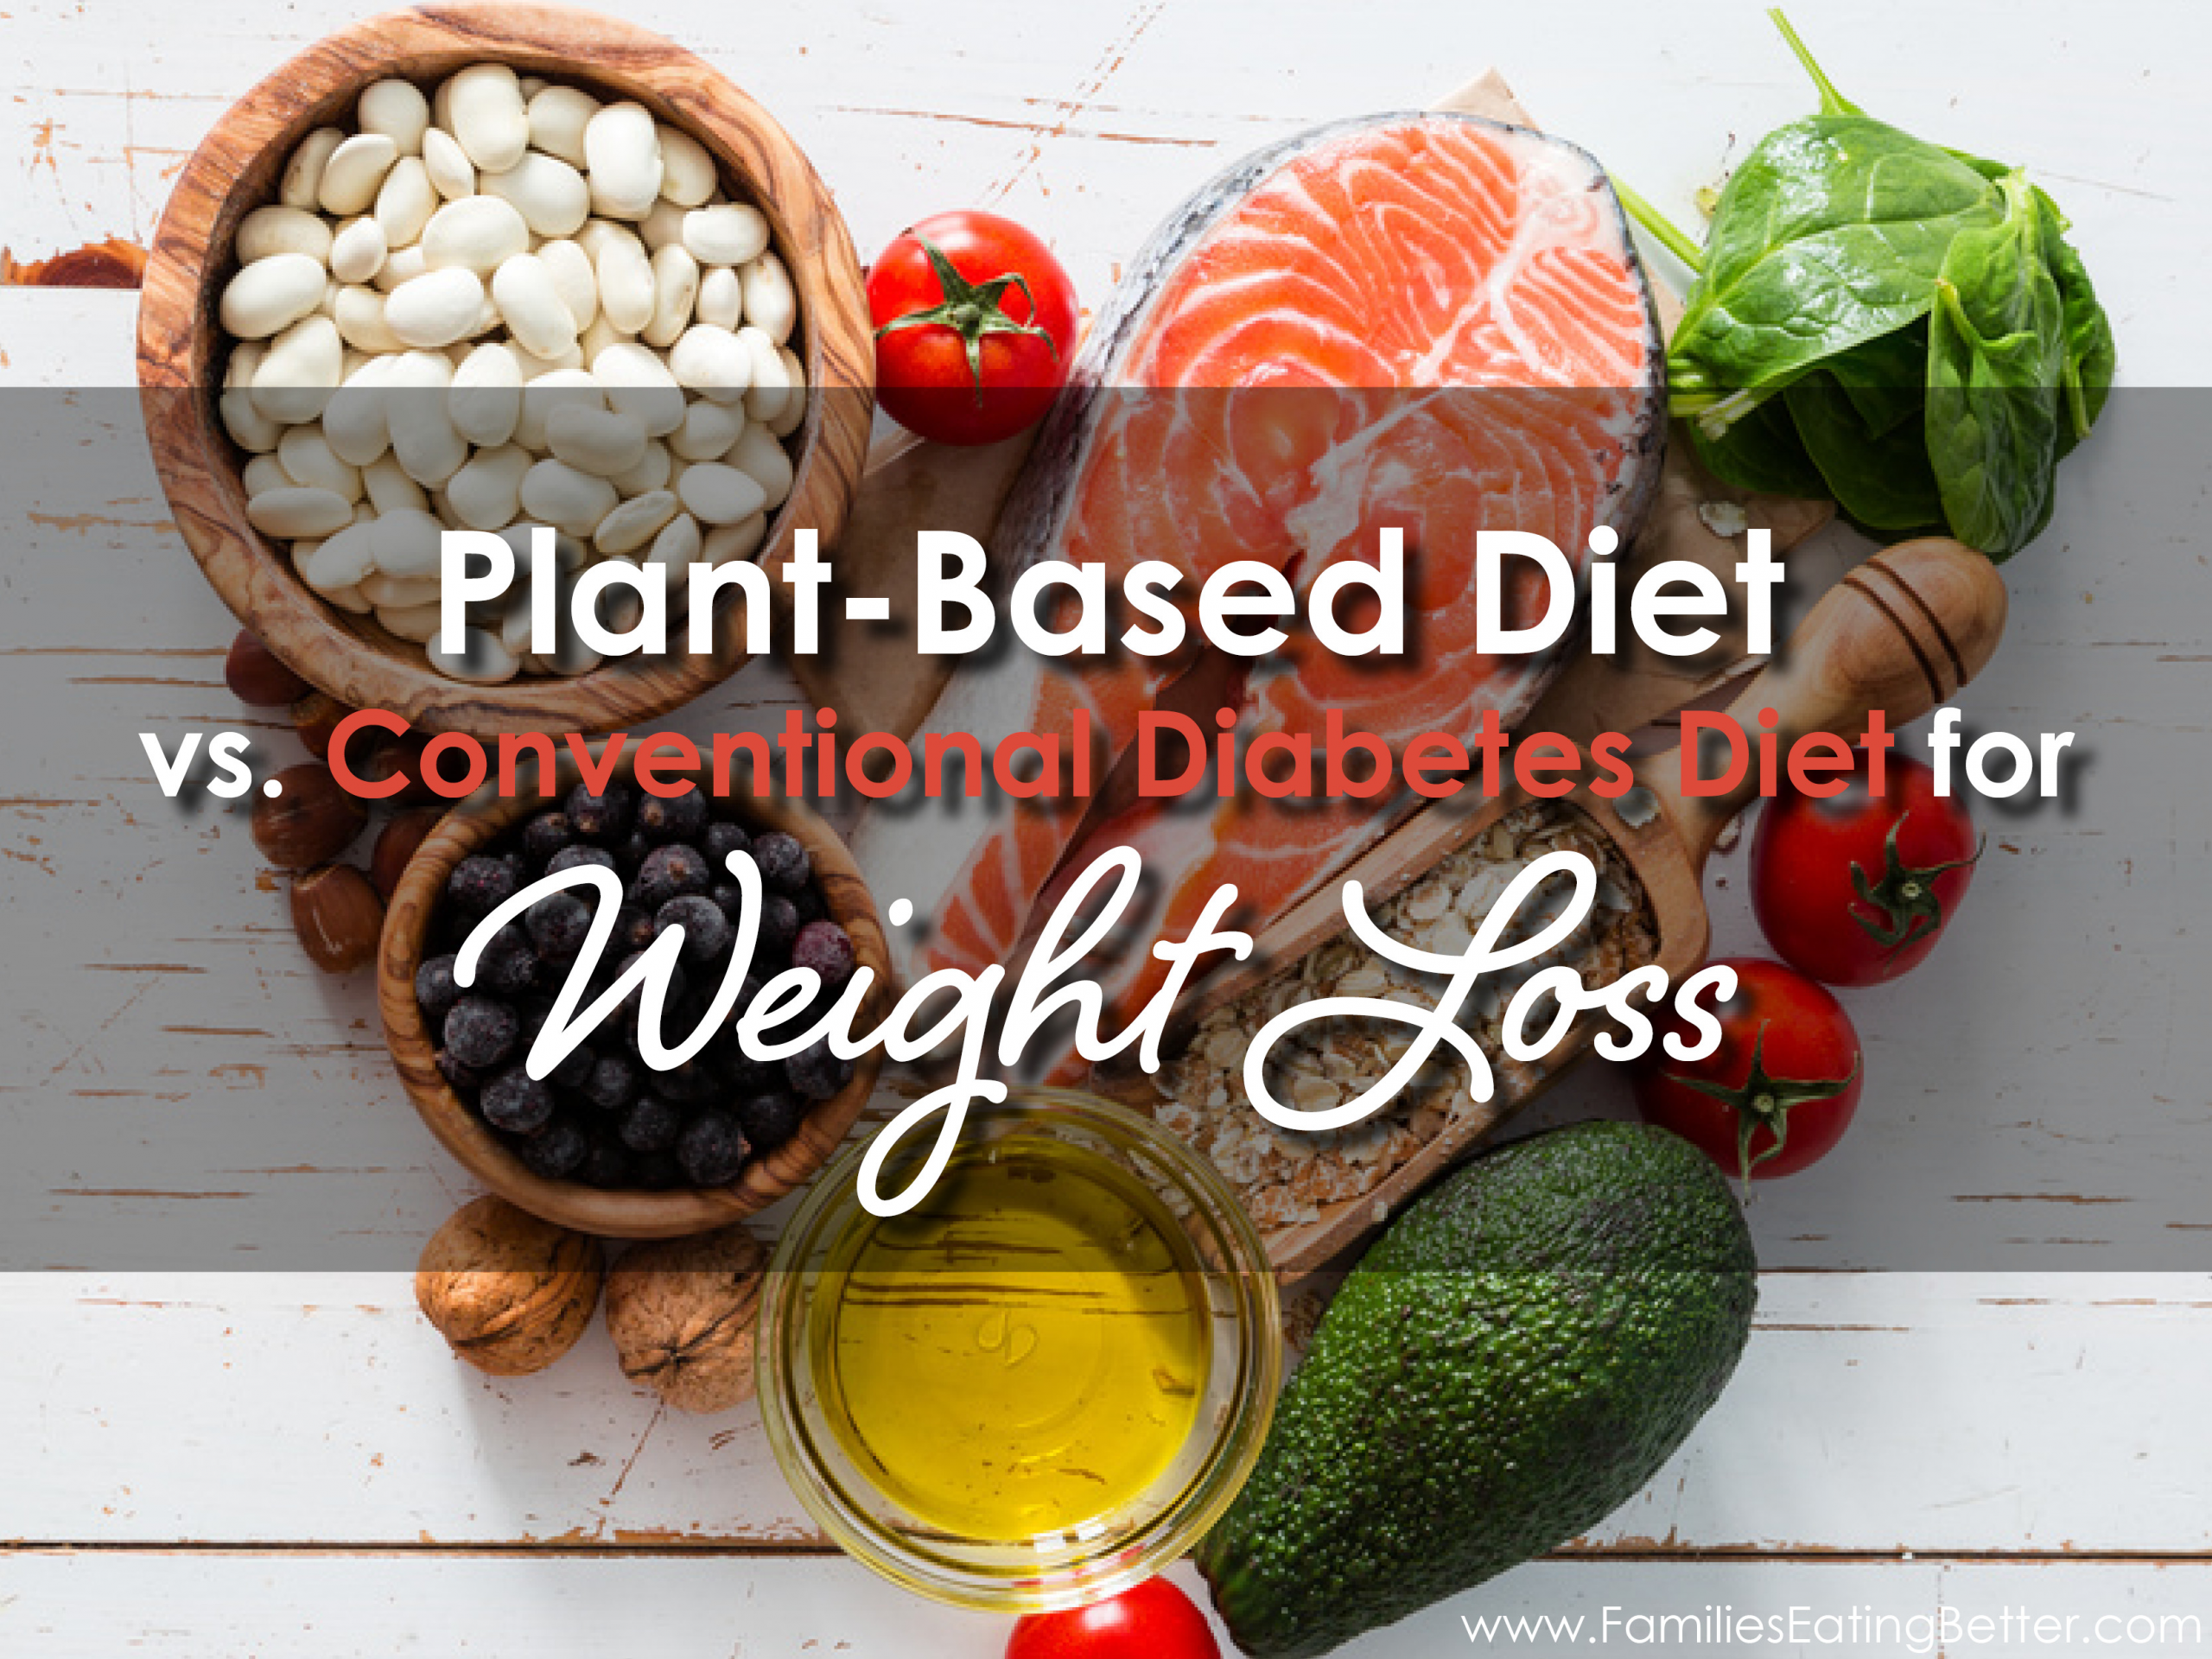 Plant Based Diet For Weight Loss Health
 Plant Based Diet vs a Conventional Diabetes Diet for